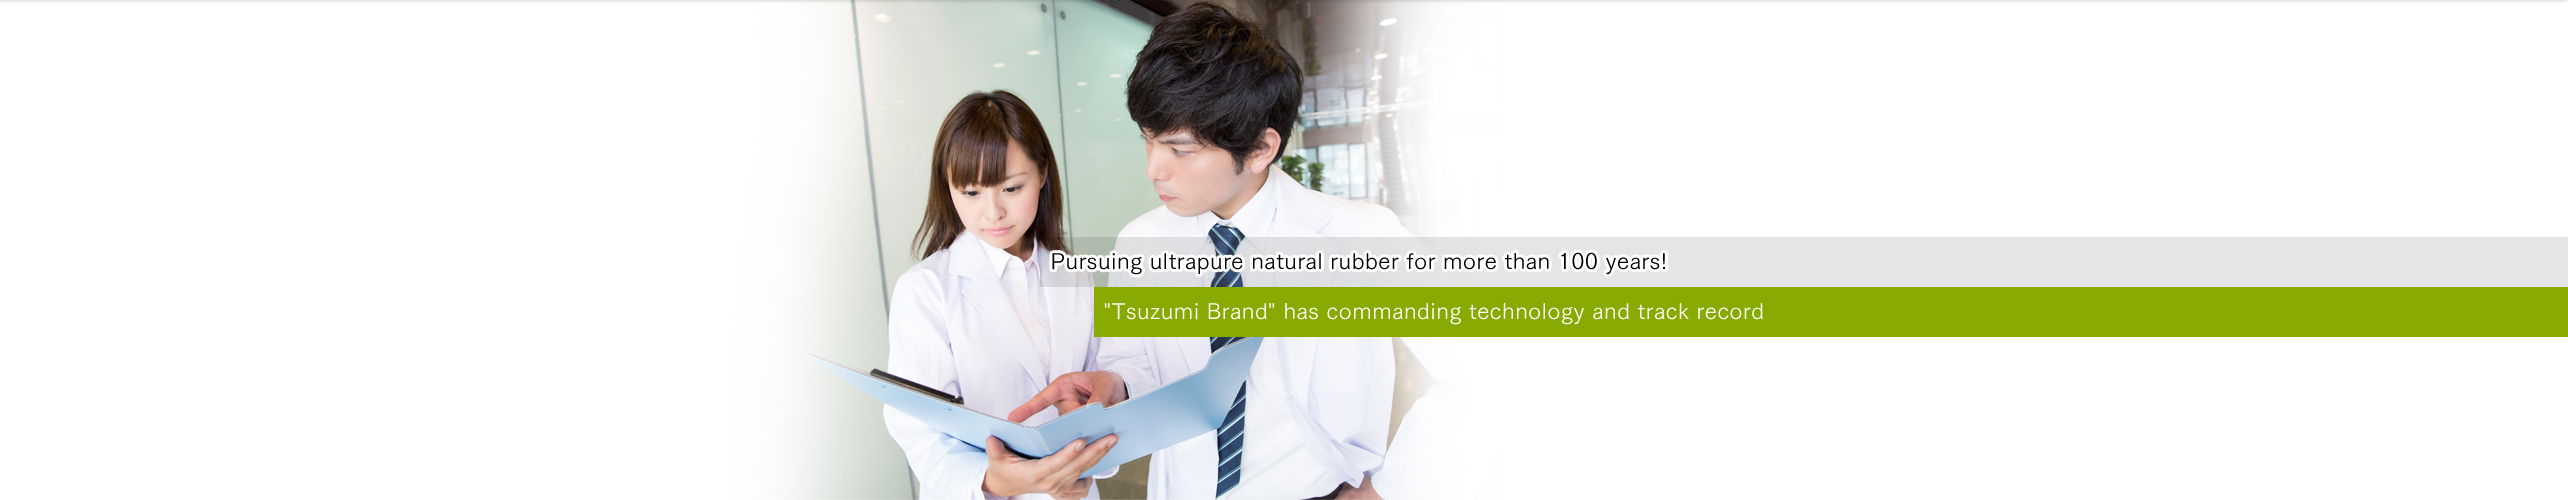 Pursuing ultrapure natural rubber for more than 100 years! Tsuzumi Brand has commanding technology and track record